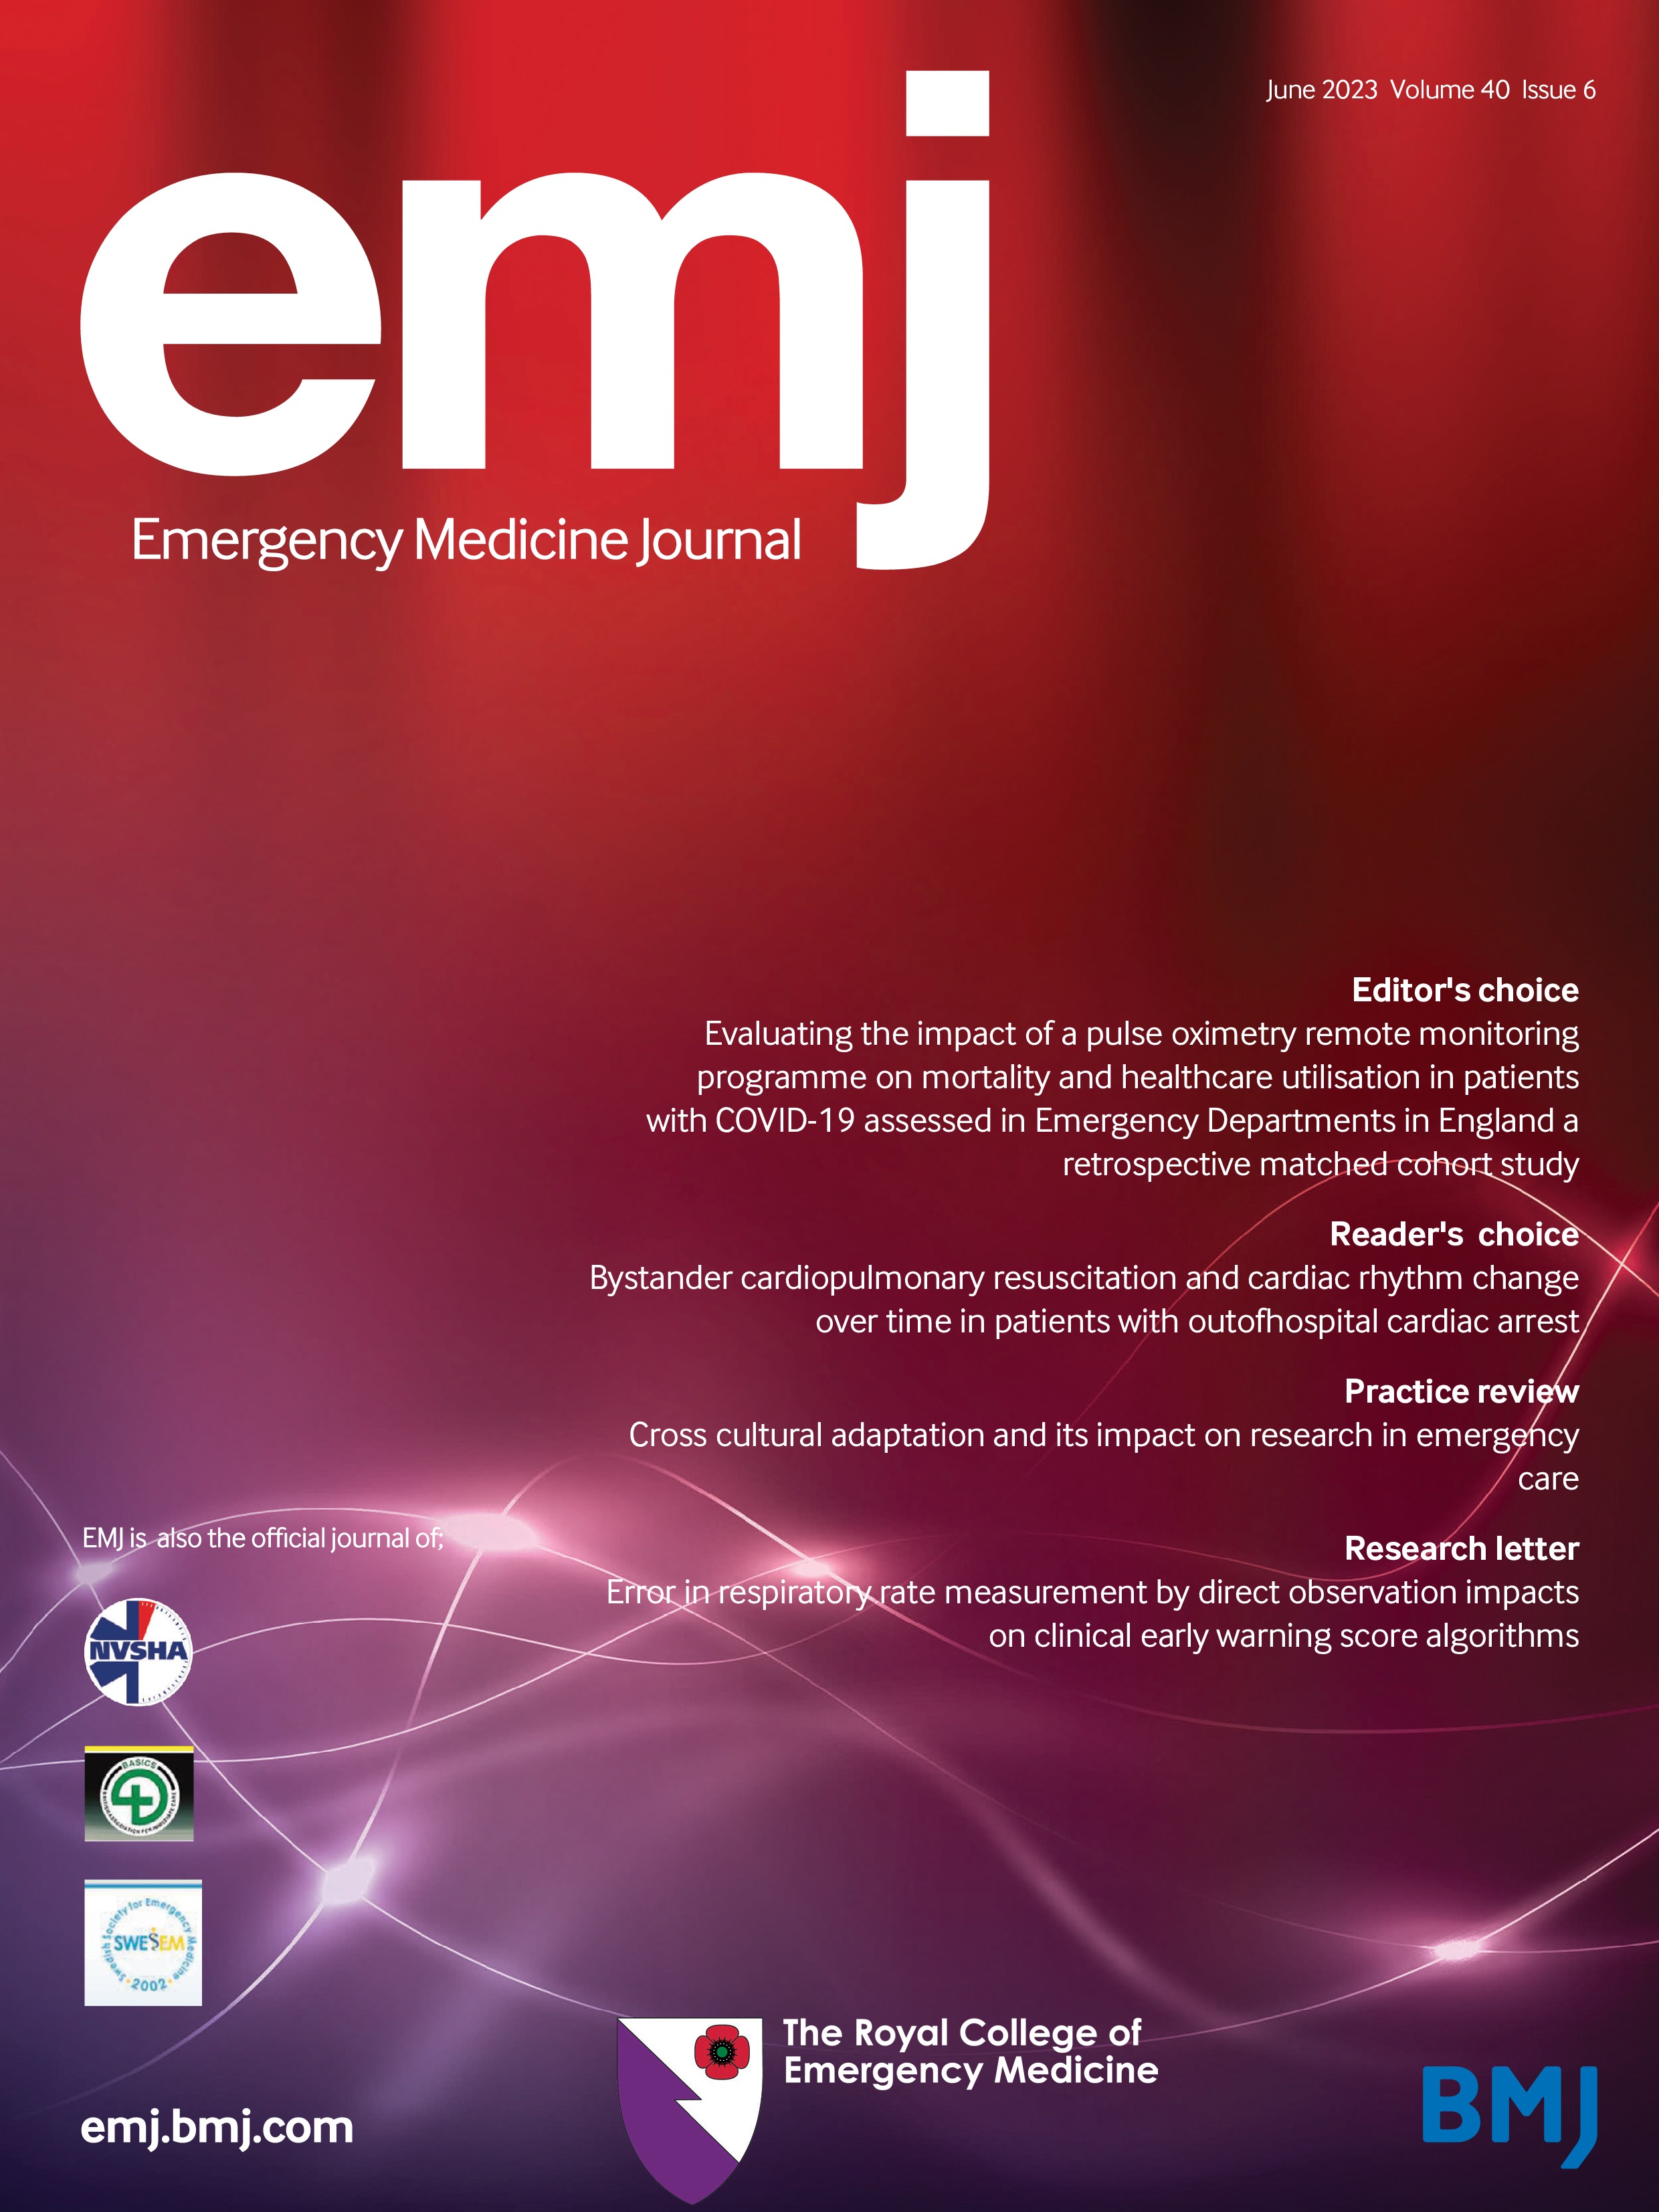 Early clinical outcome prediction based on the initial National Early Warning Score + Lactate (News+L) Score among adult emergency department patients